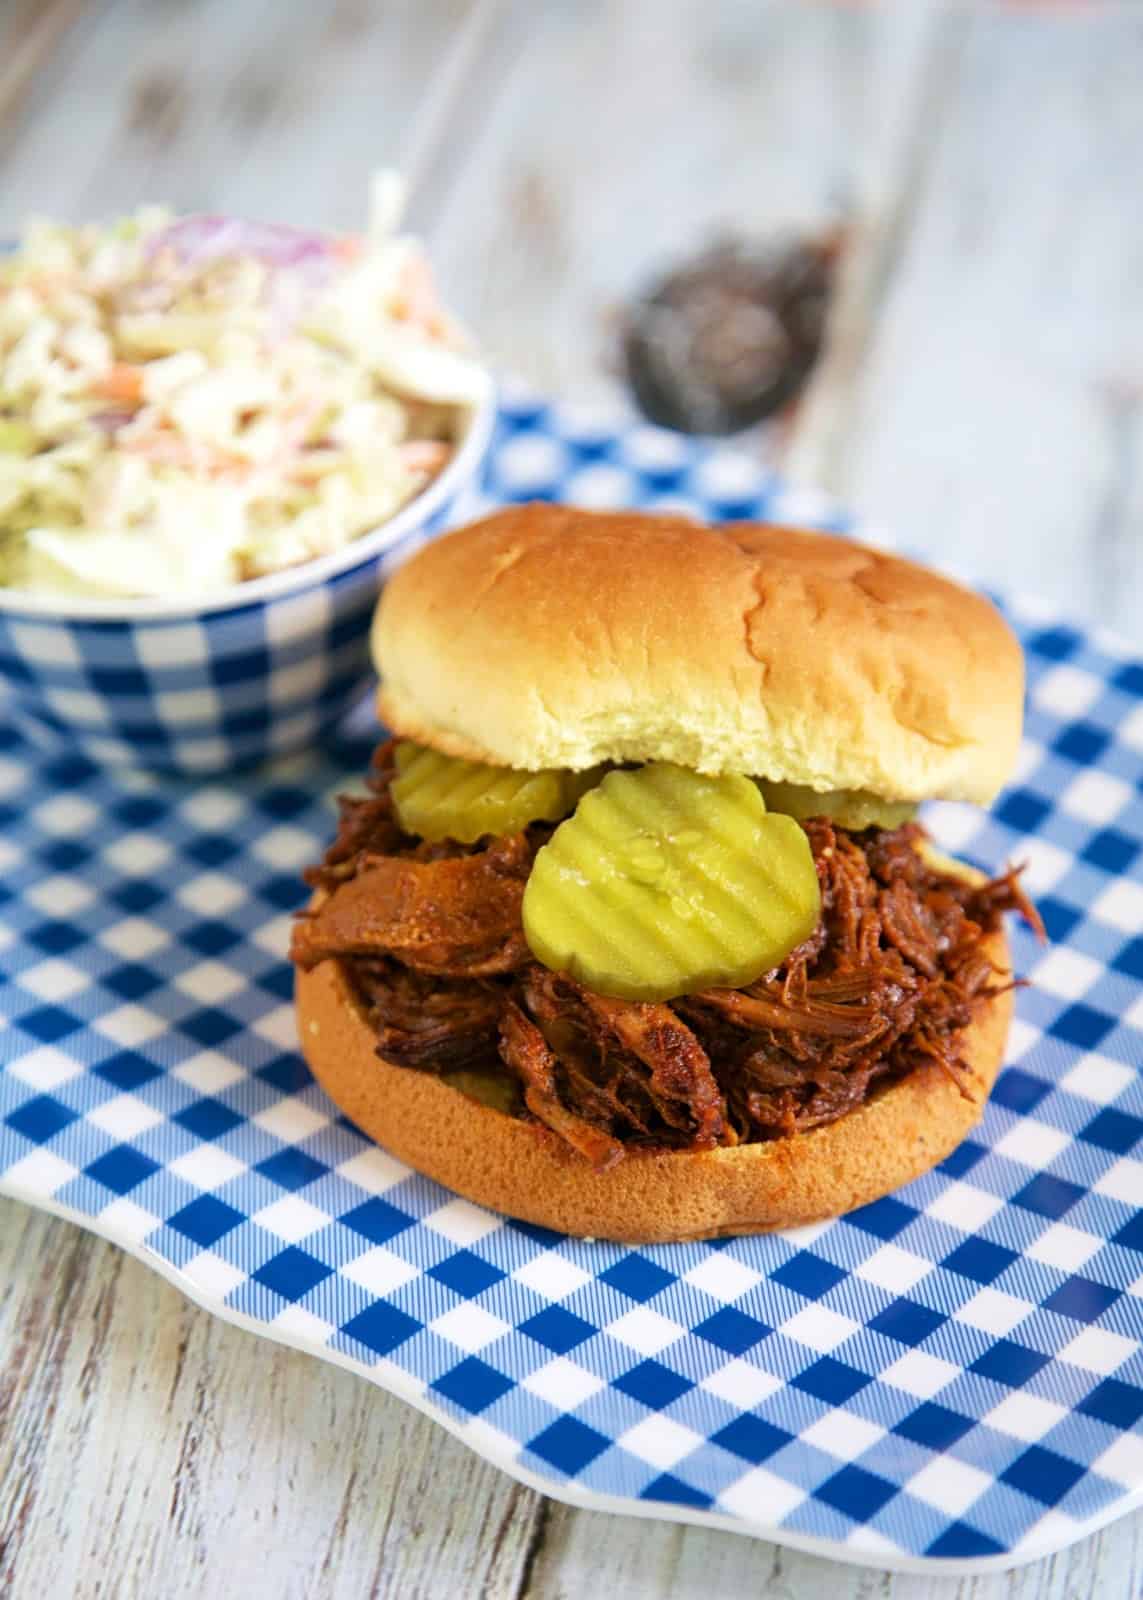 Slow Cooker Beef and Pork BBQ Sandwiches - stew meat and pork tenderloin slow cook in a homemade BBQ sauce. I can't believe I've never combined these two meats before! These are the BEST BBQ sandwiches!!